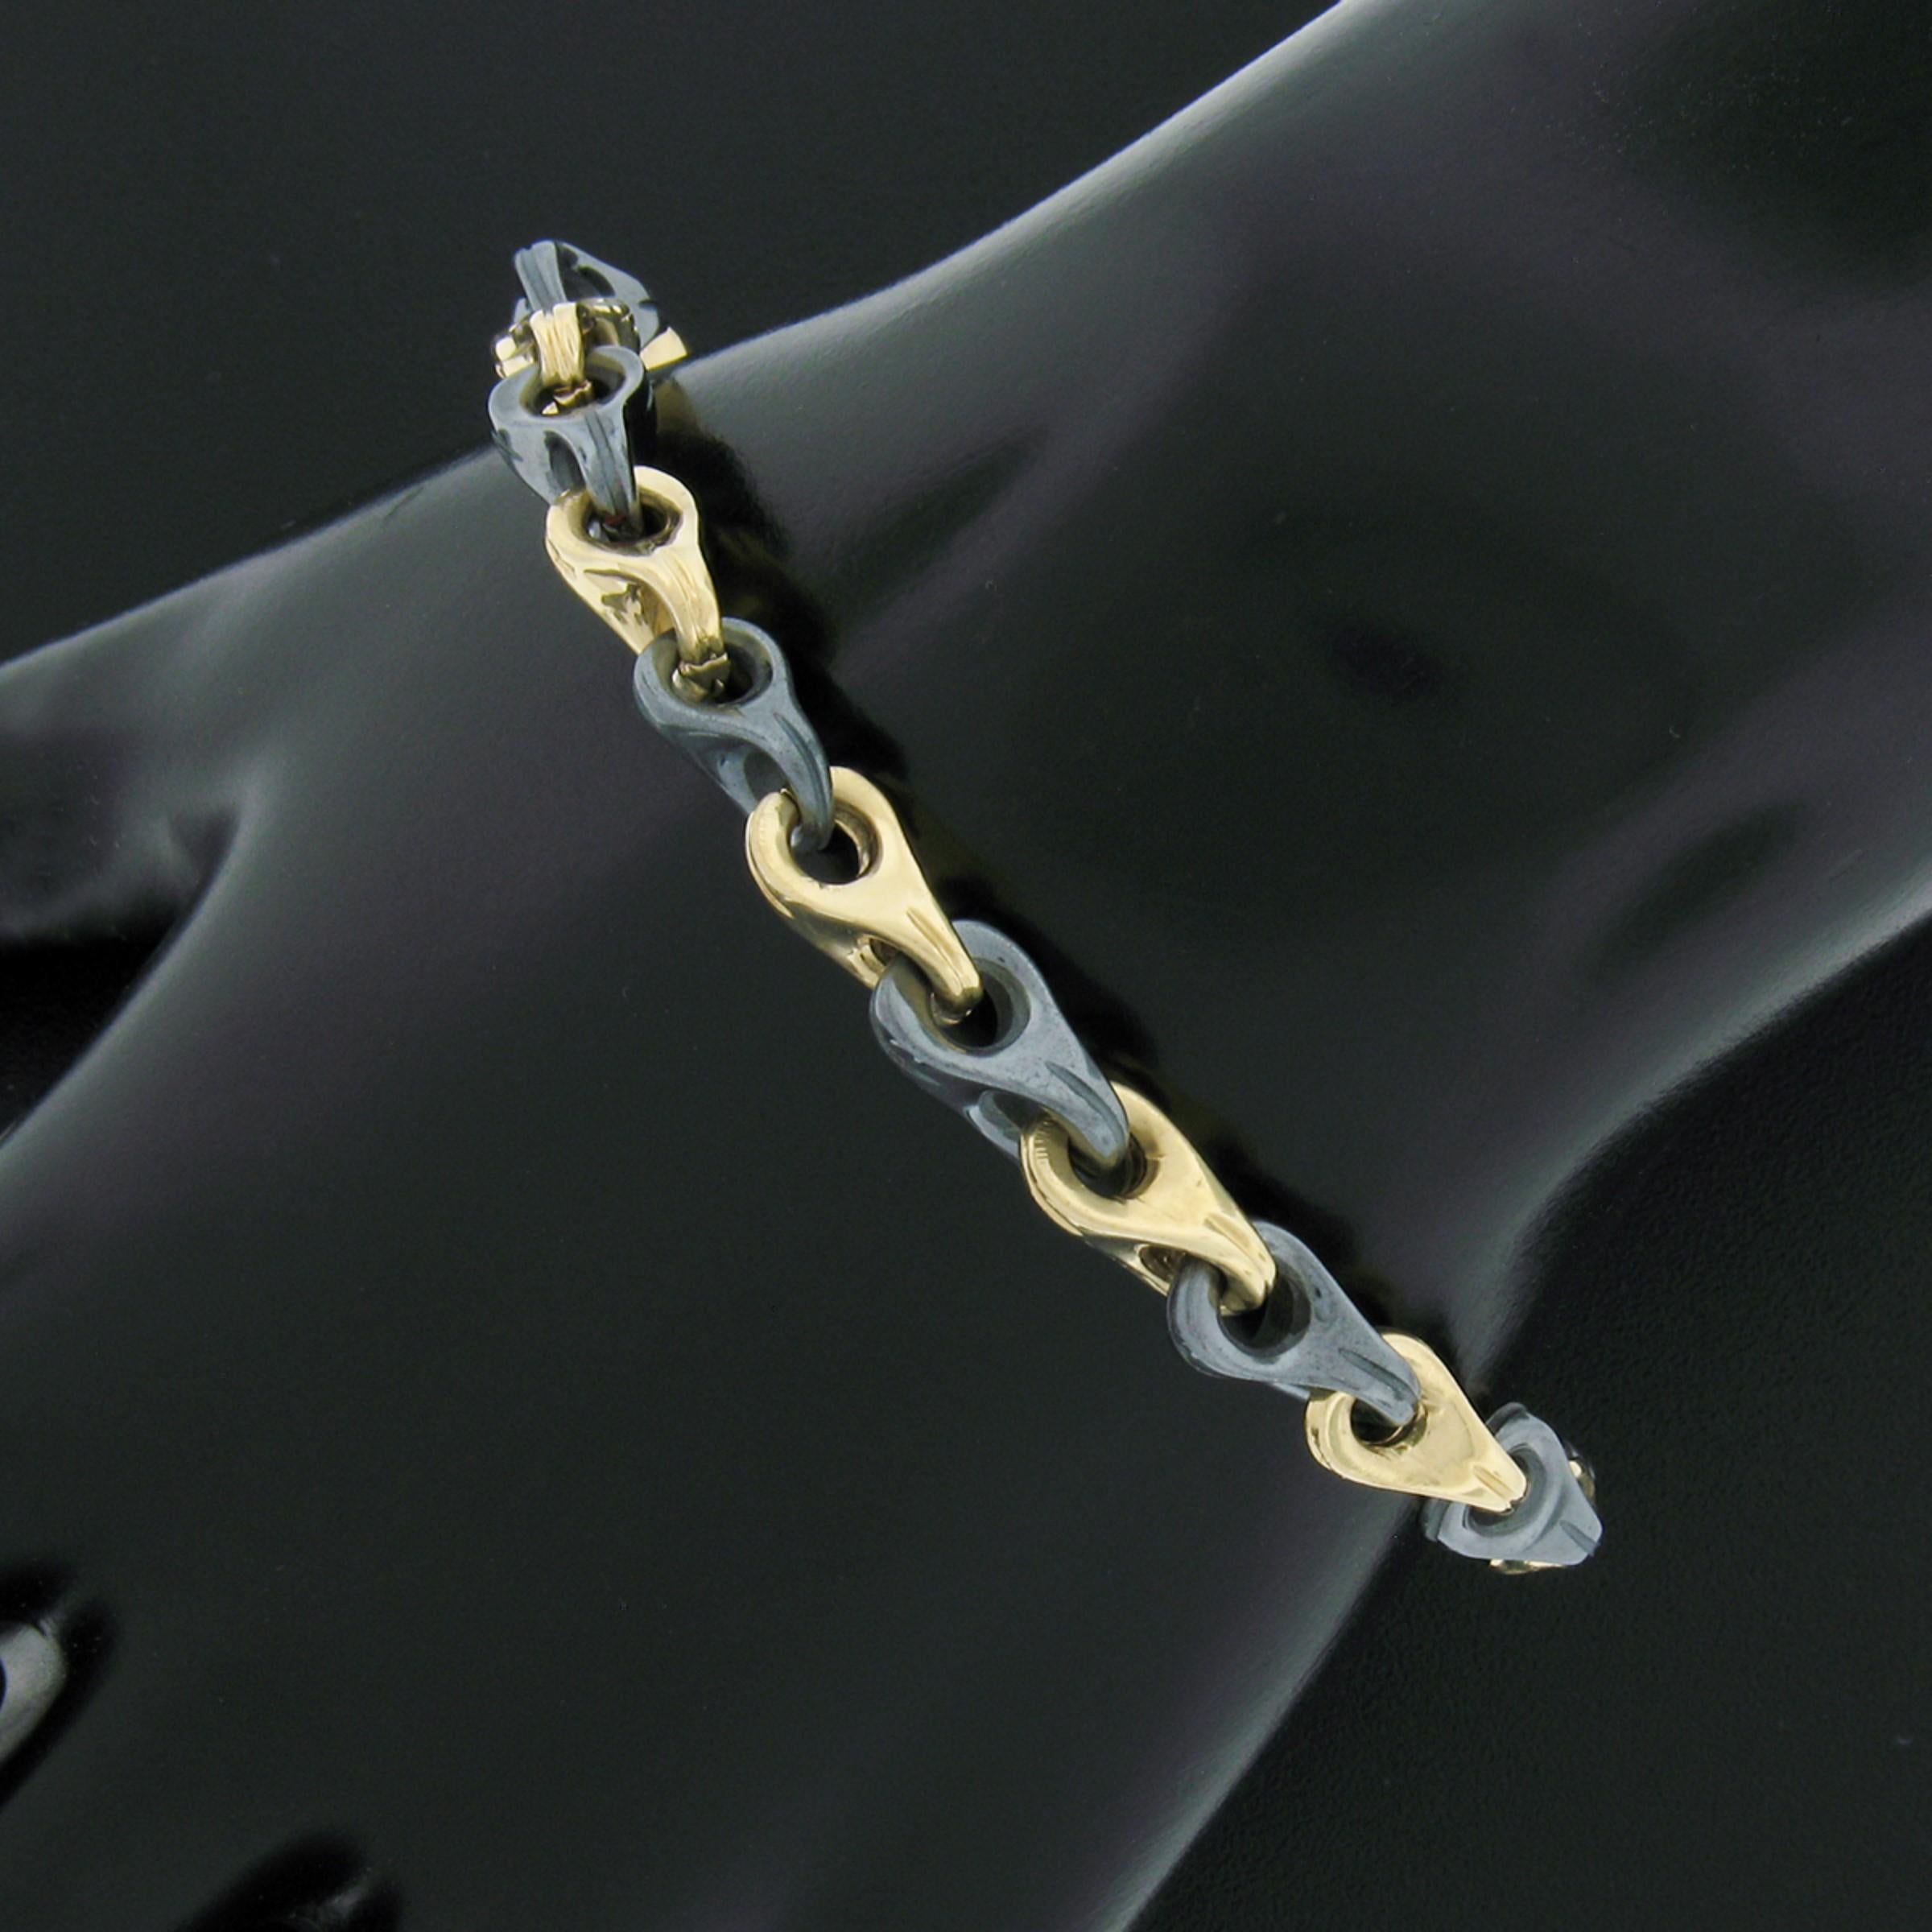 This beautiful vintage bracelet was well crafted in Italy from solid 14k yellow gold and is nicely structured with alternating links throughout. The links feature gorgeous hematite stones displaying a fine metallic gray color throughout their